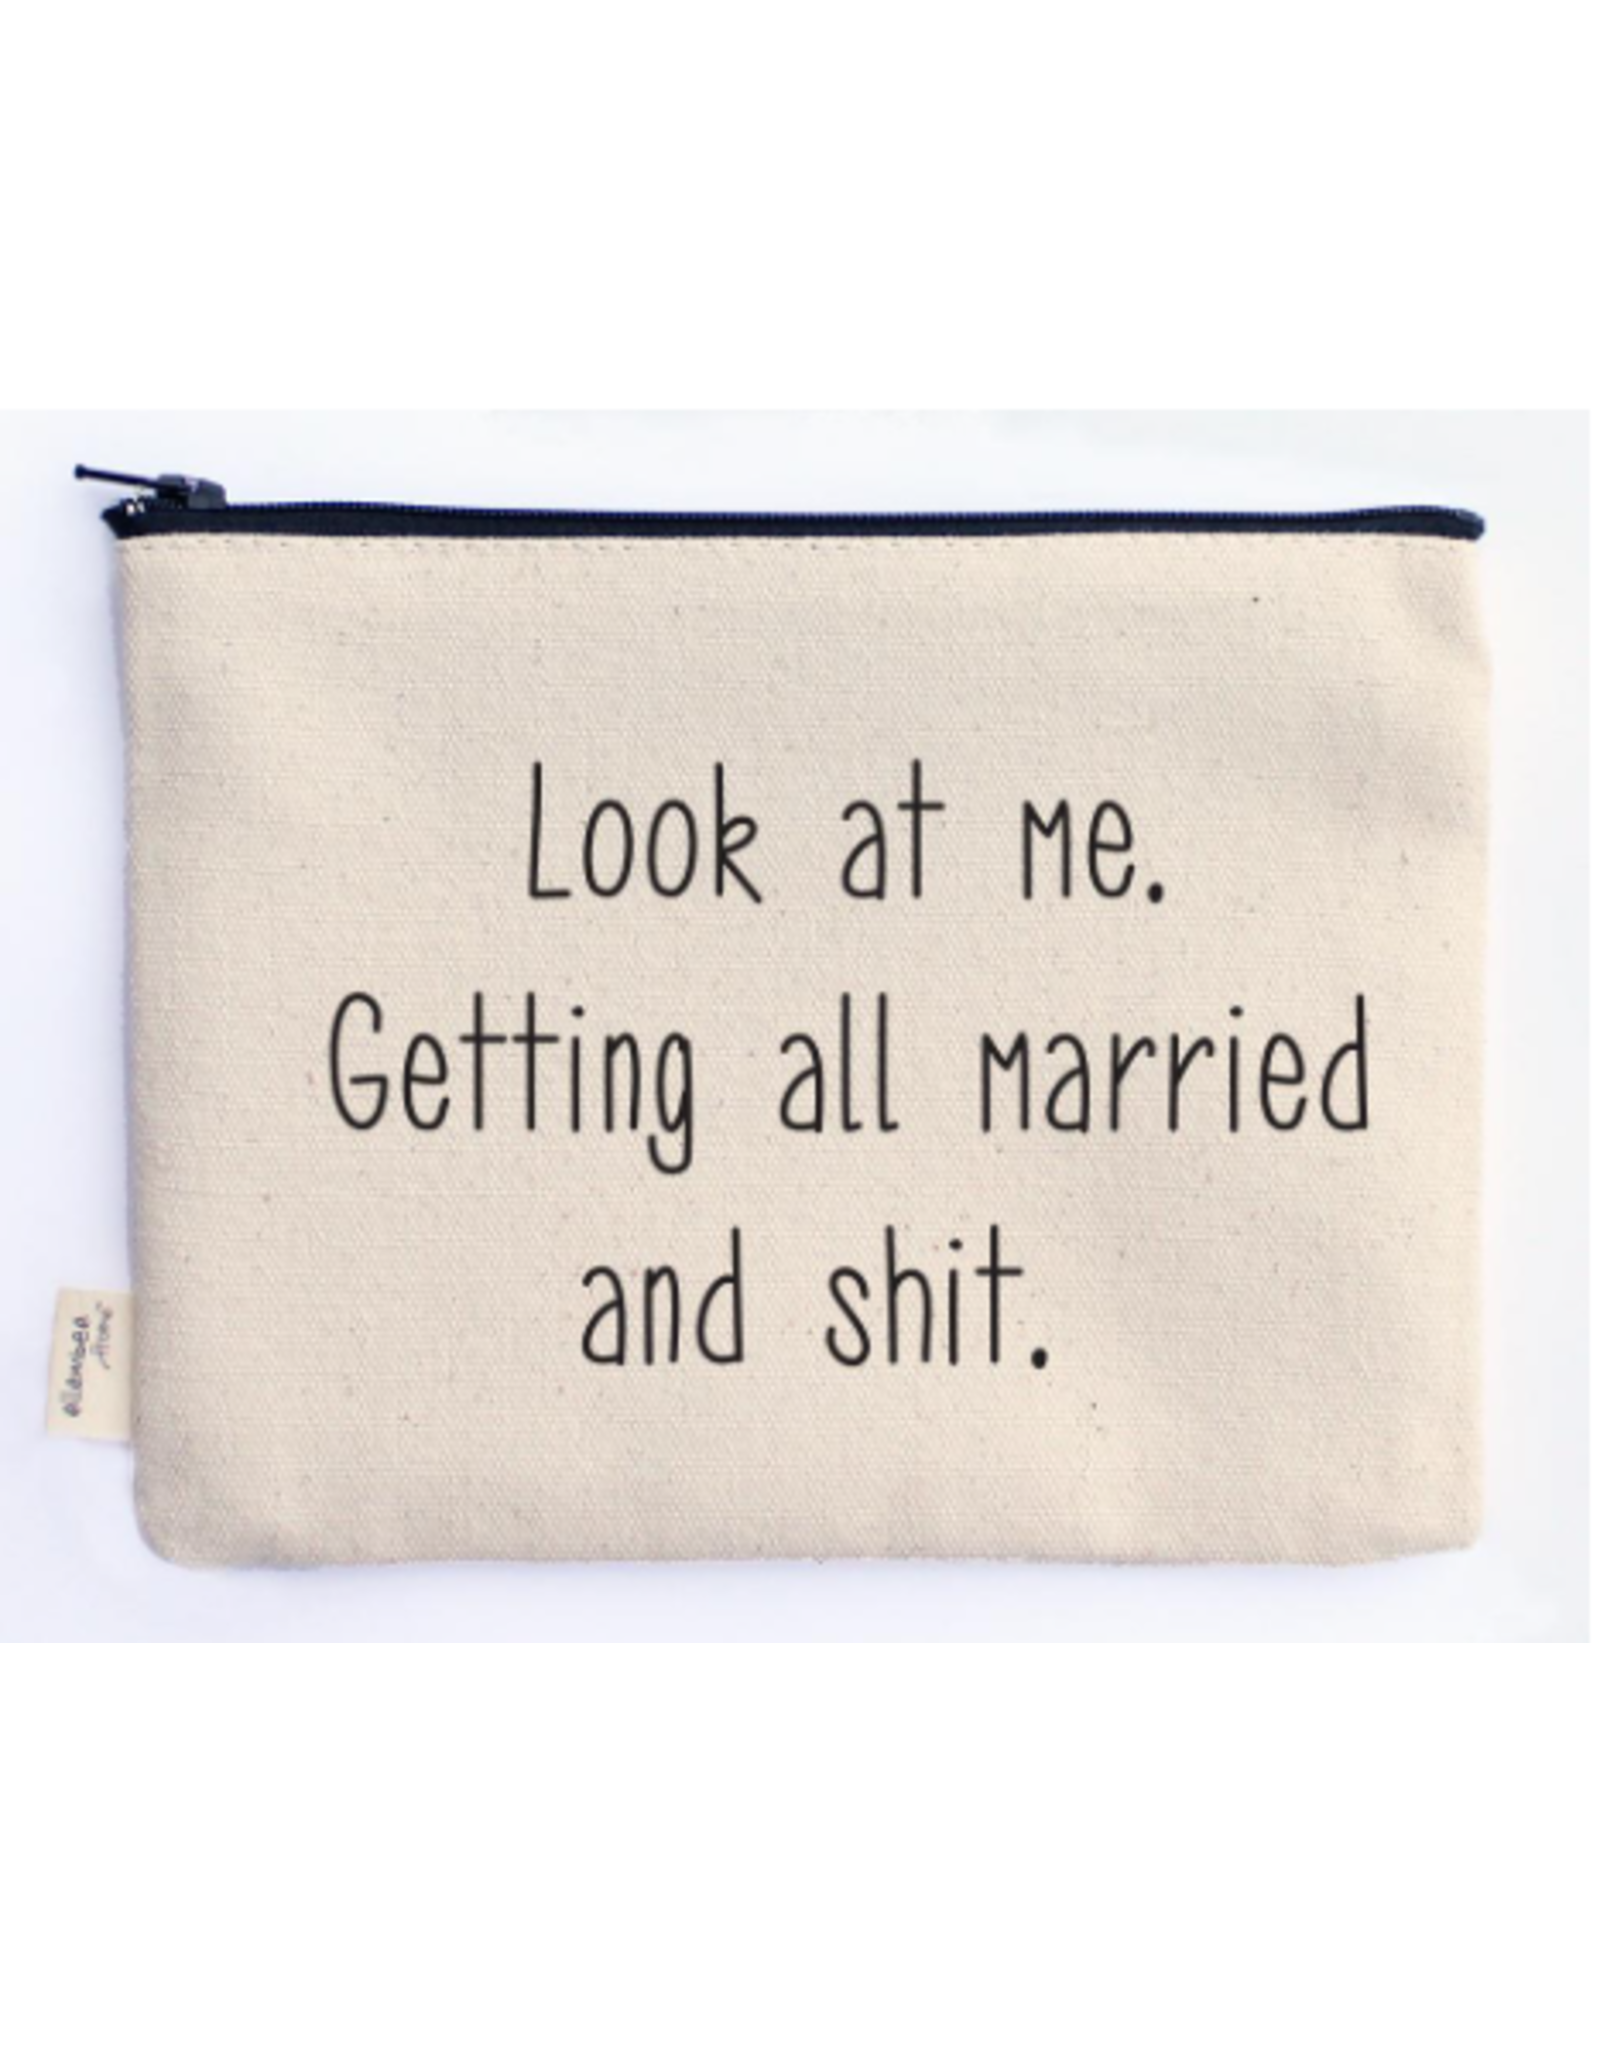 Ellembee Home Zipper Pouch, Getting All Married